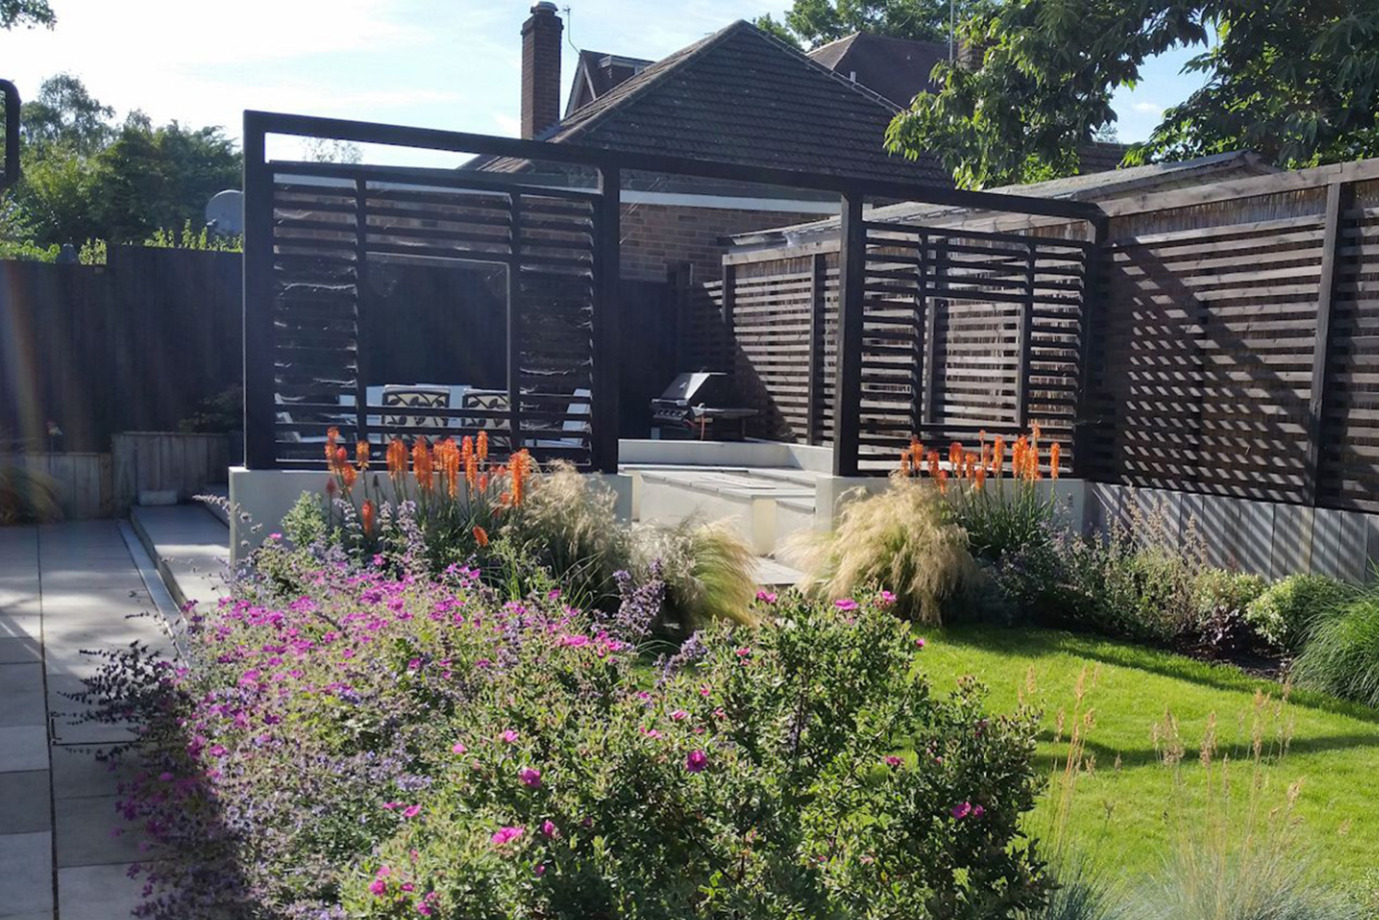 Garden design in Crowthorne, Berkshire with outdoor rooms, fireplace, pergola and terraced levels.